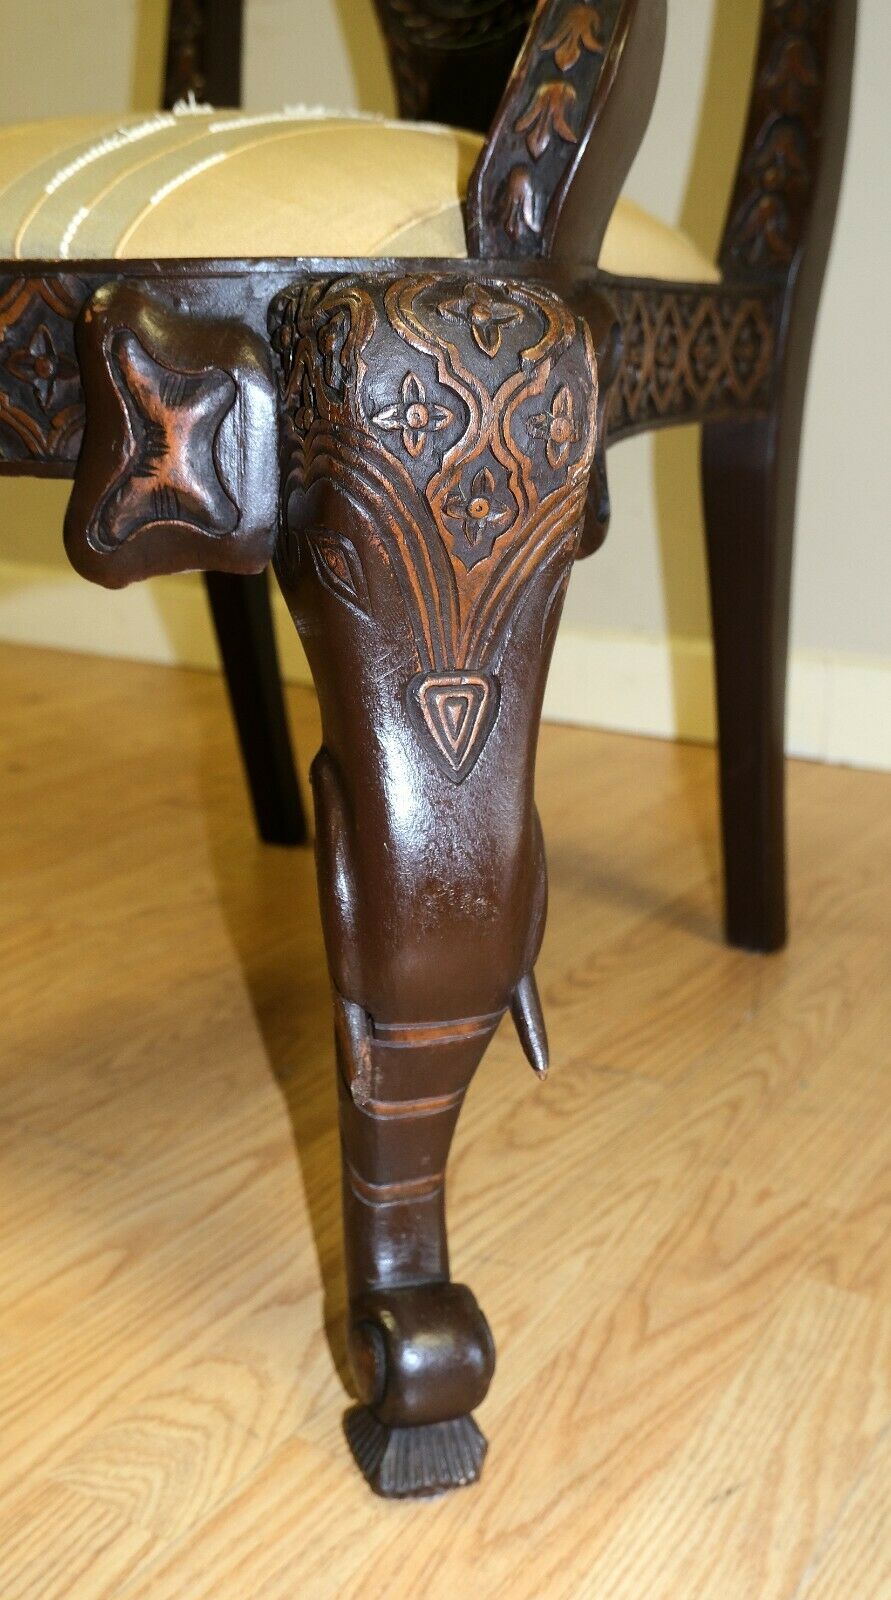 We are delighted to offer for sale this lovely hand carved with Elephant legs armchair with fabric seat.

The armchair is beautifully presented with elephant carved front legs, along with lovely carved padded armrests. The back splat support shows